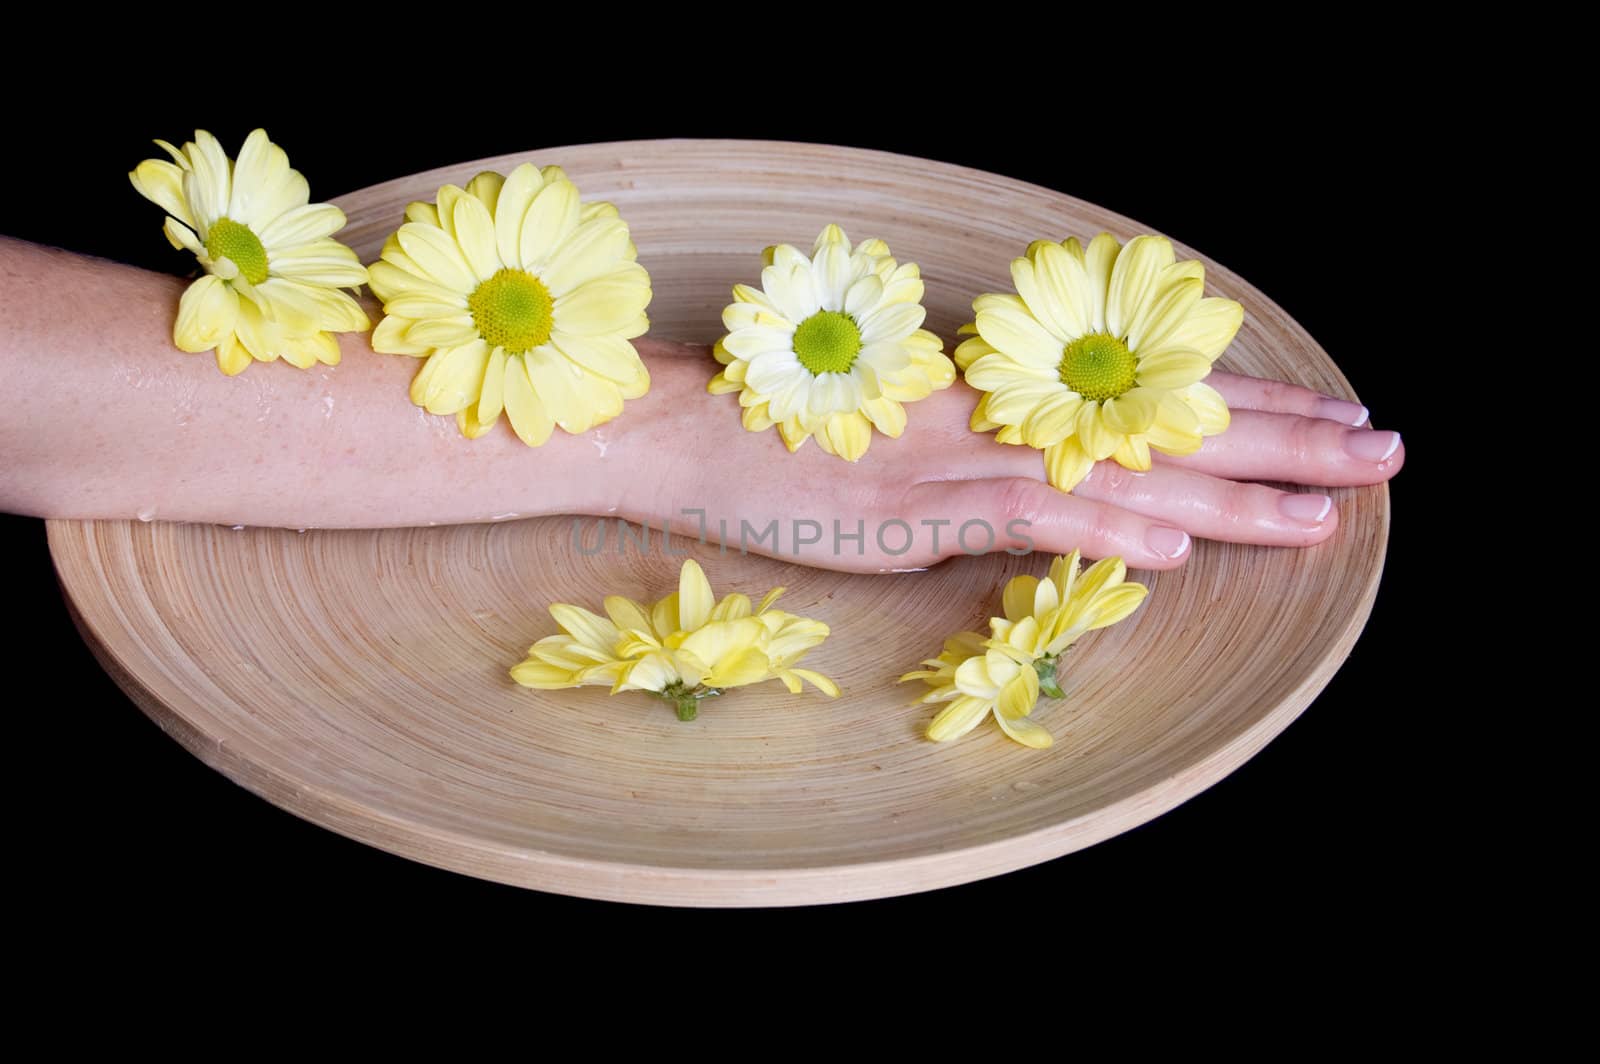 Woman hands and flower in bucket of water isolatedon black